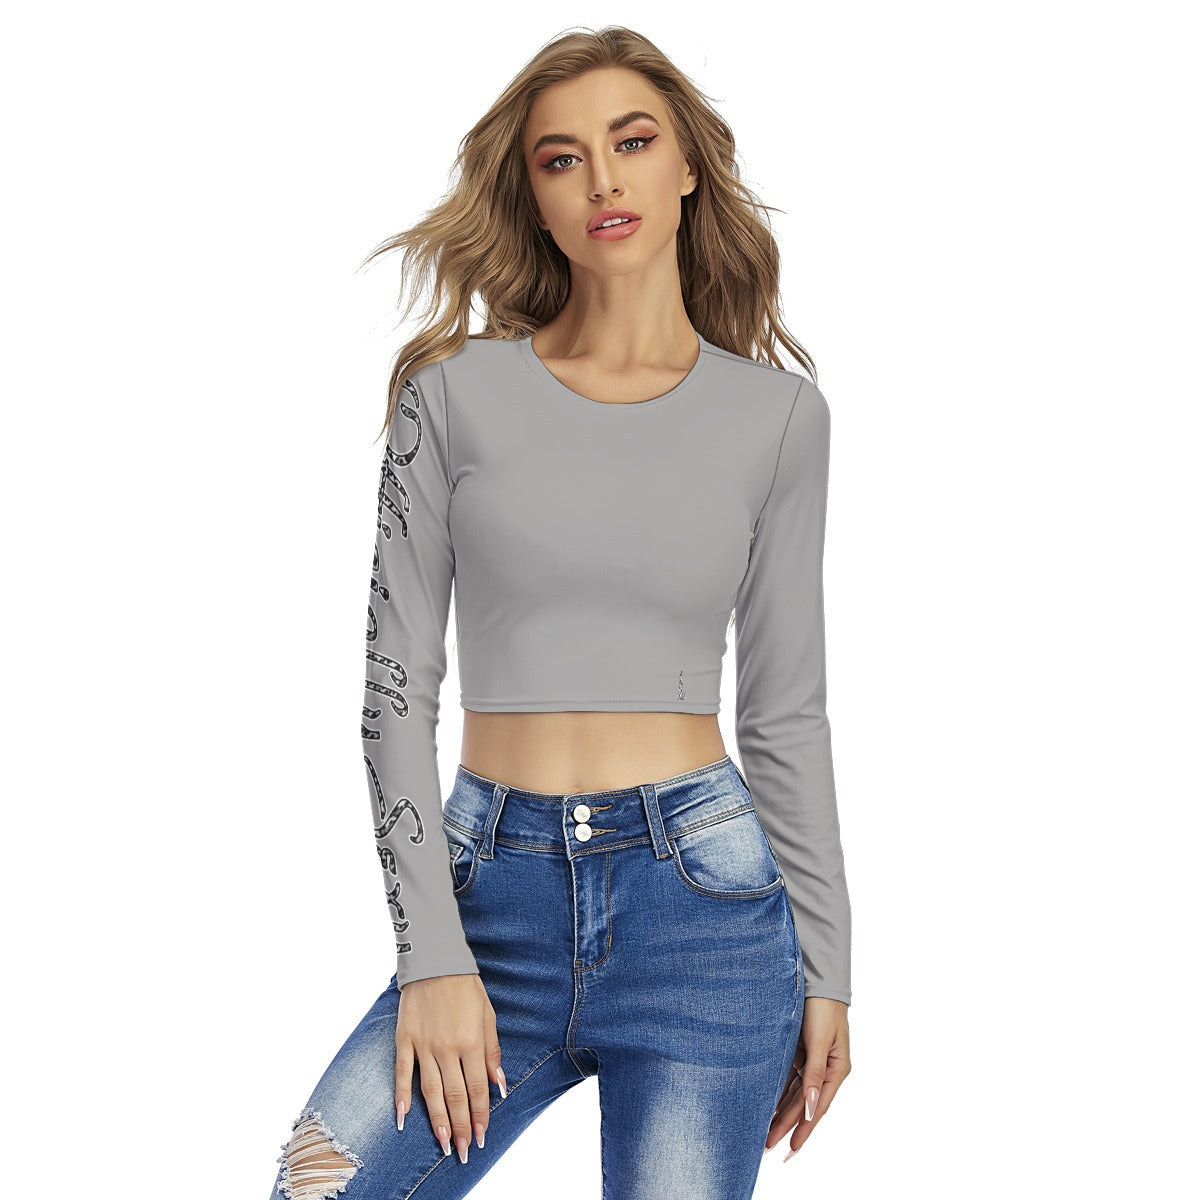 Officially Sexy Snow Leopard Print Collection Women's Grey Round Neck Crop Top Long Sleeve T-Shirt (English) 1